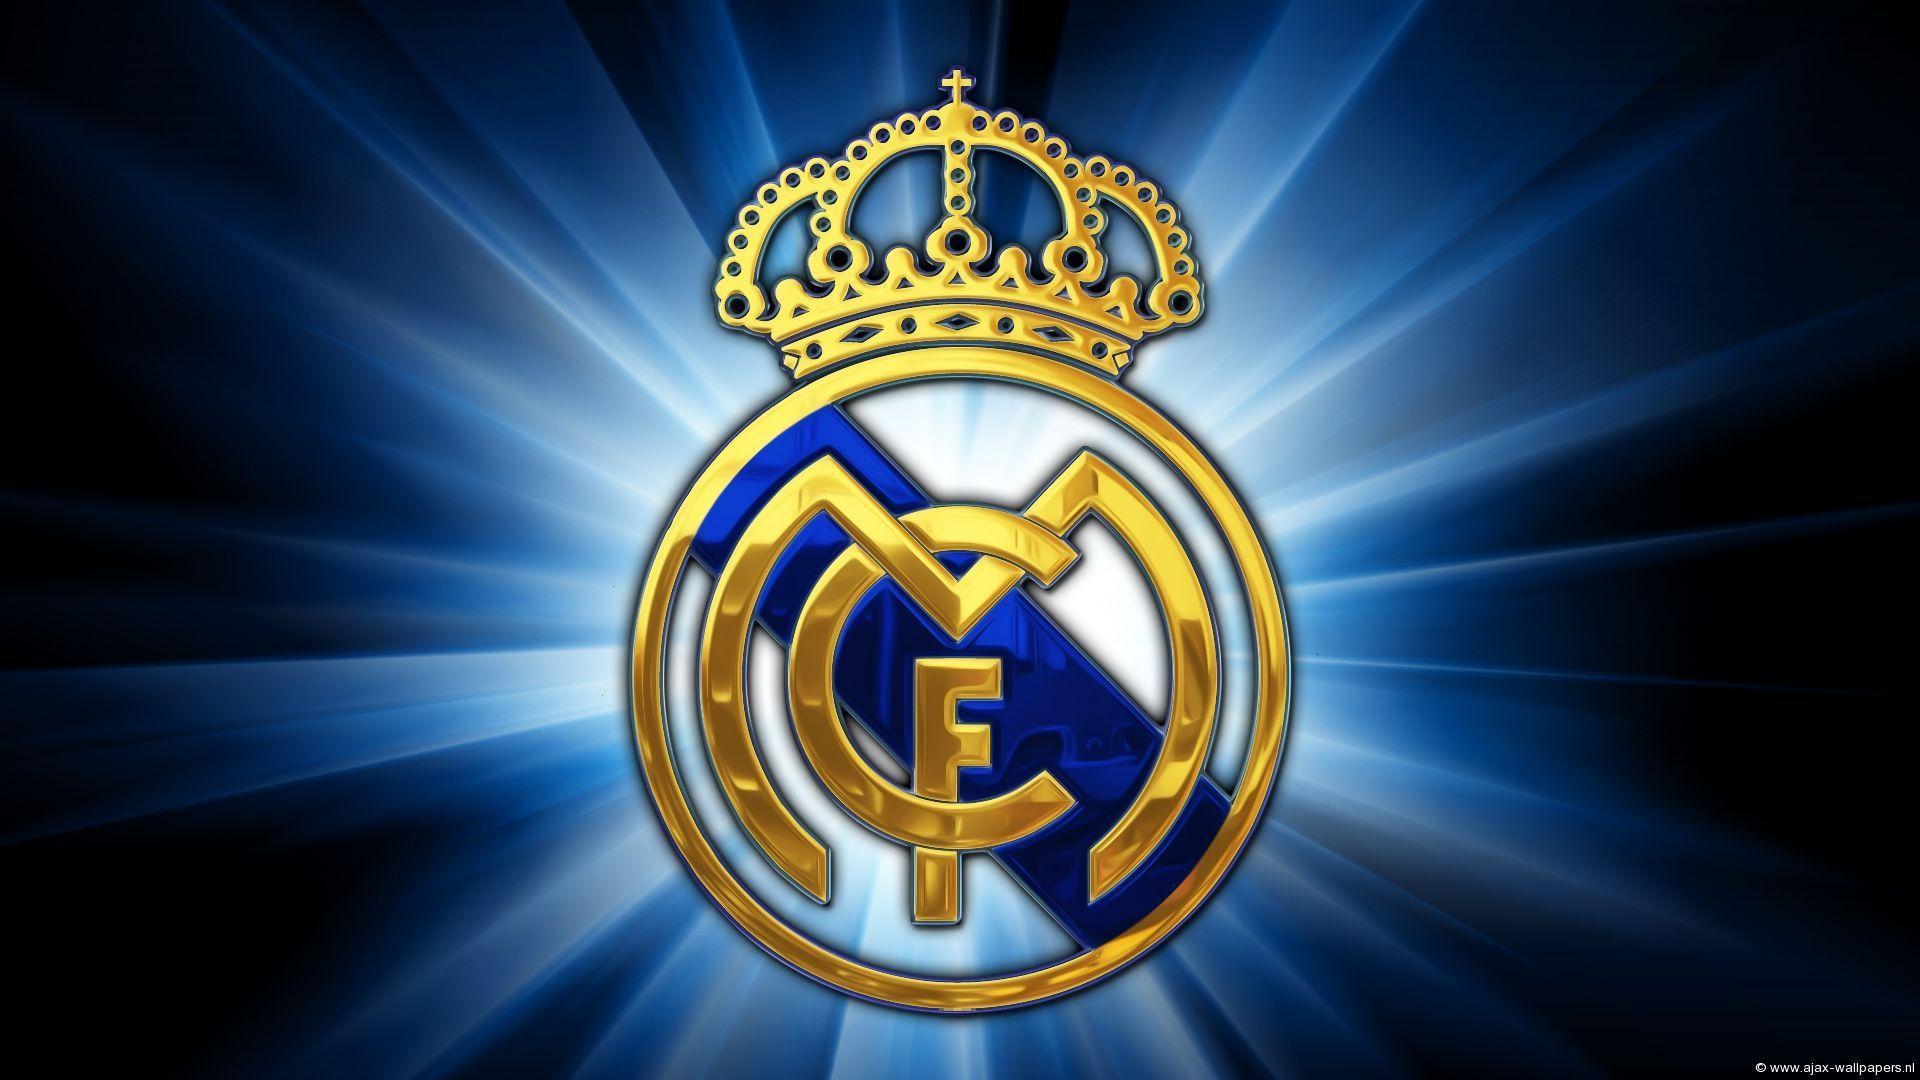 image about Real Madrid C.F. Real Madrid